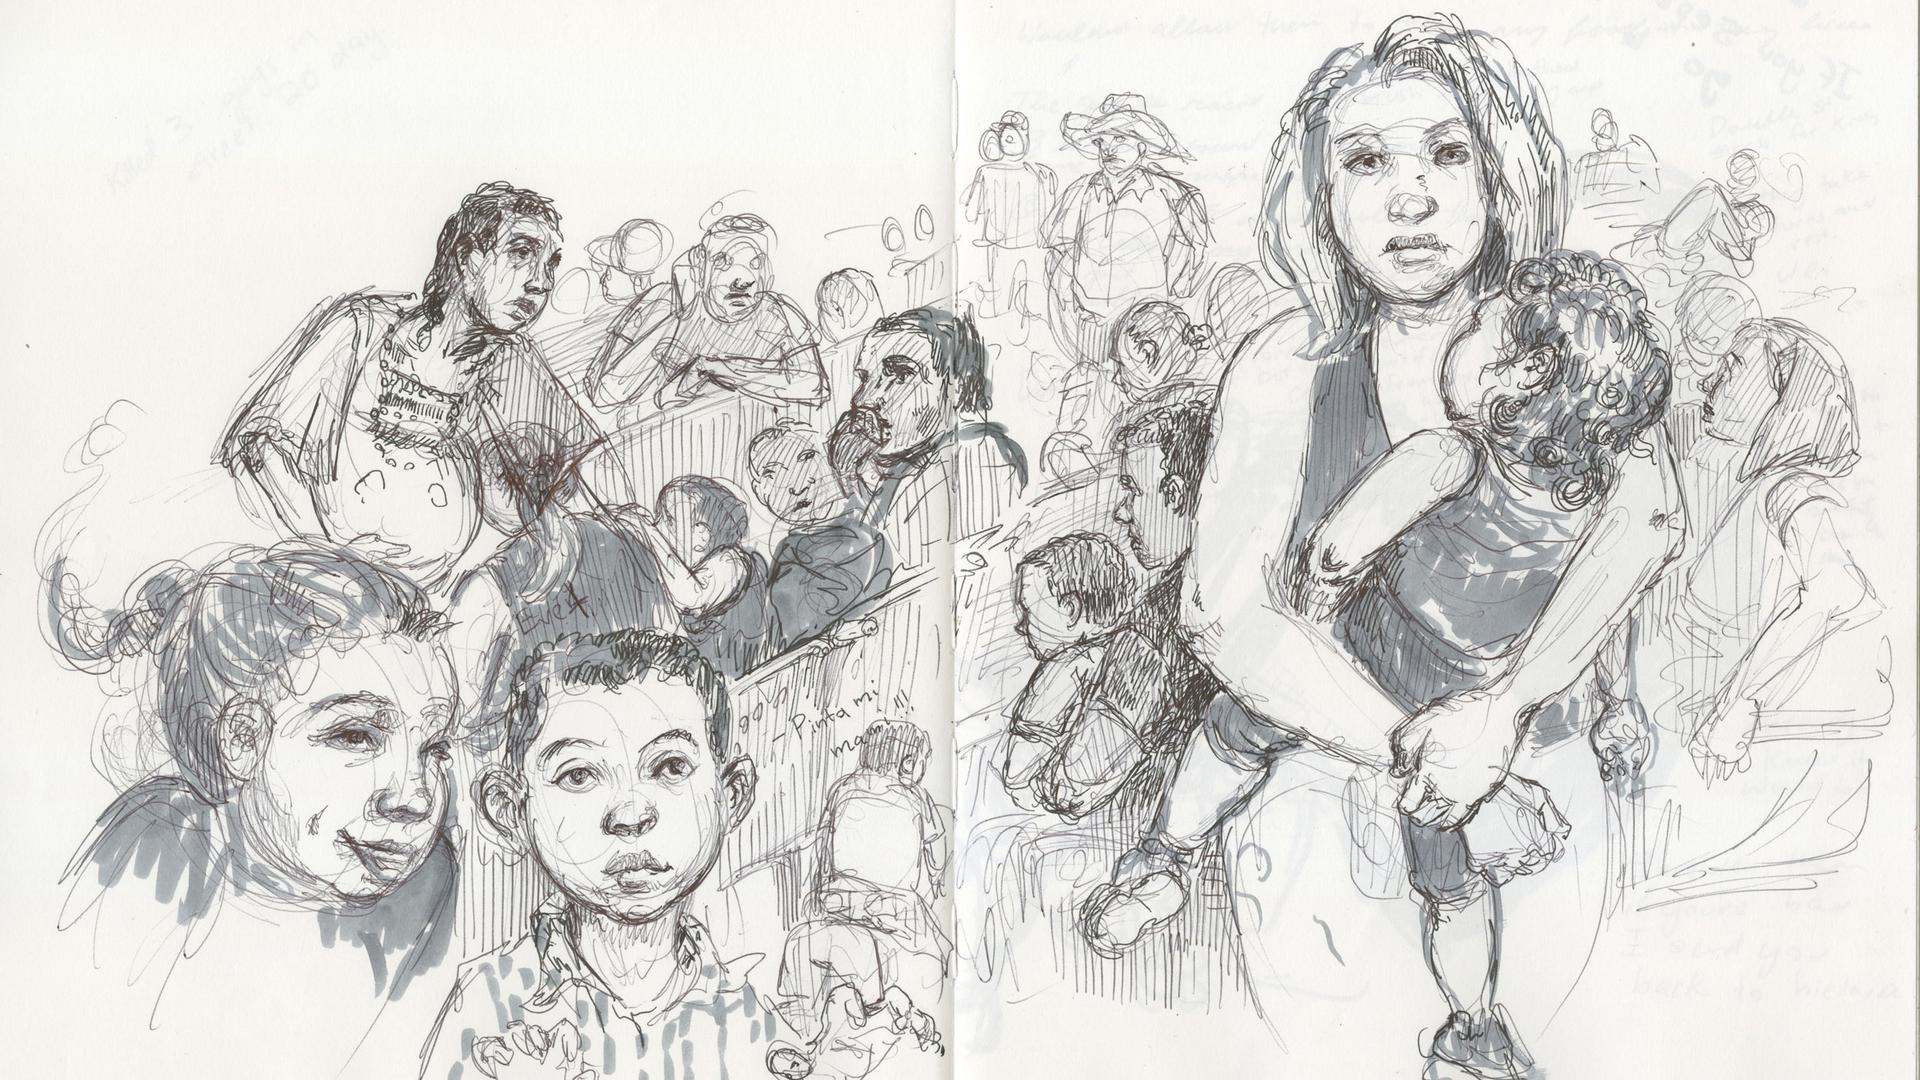 An pen and ink illustration shows a chaotic scene of women holding children in a crowded area